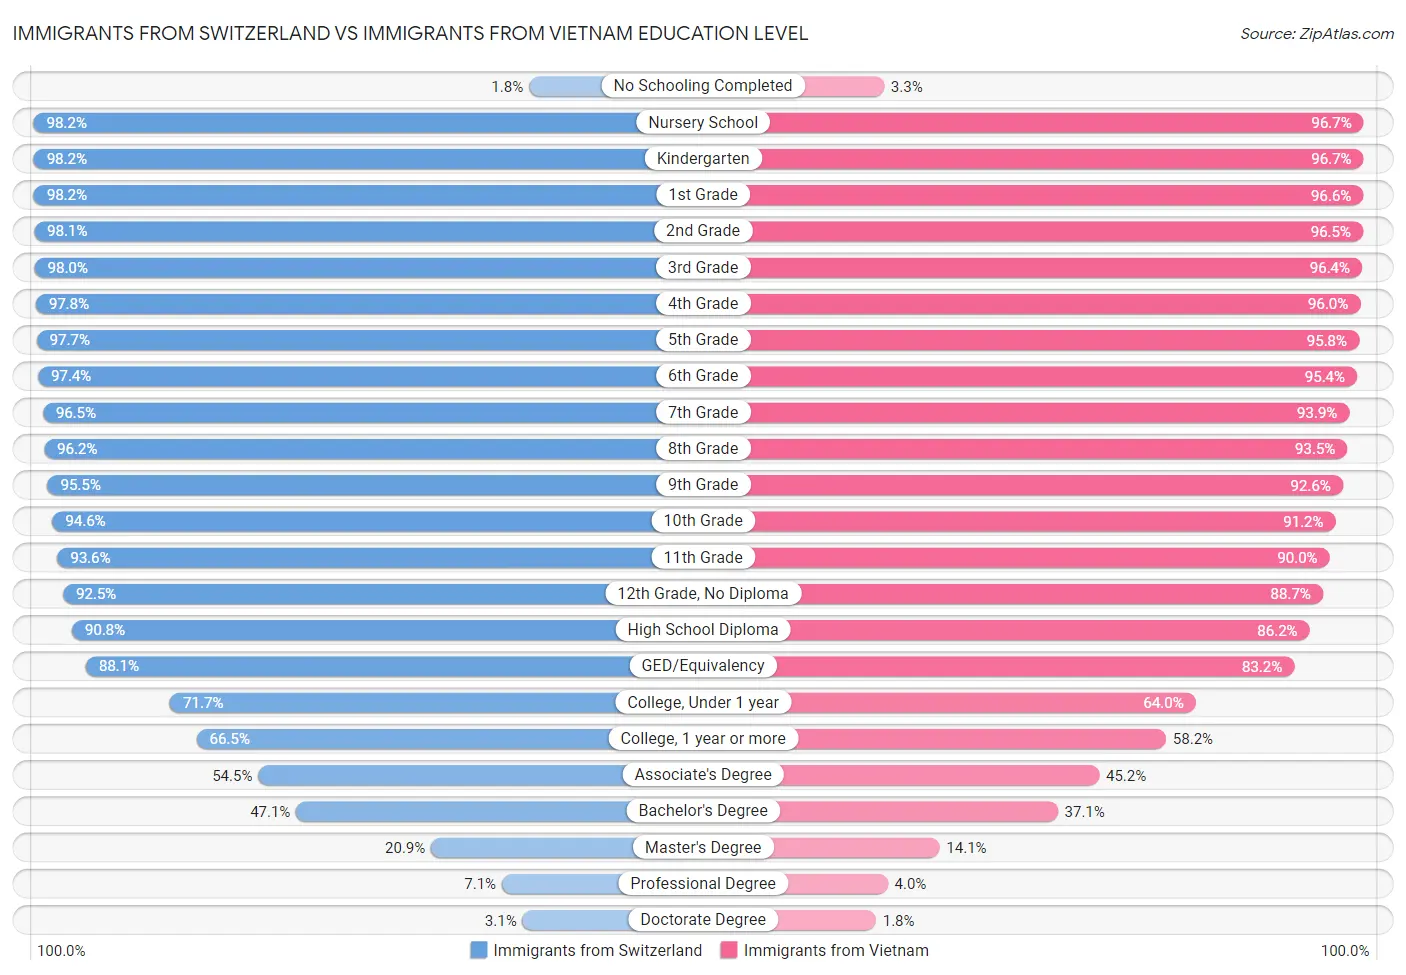 Immigrants from Switzerland vs Immigrants from Vietnam Education Level